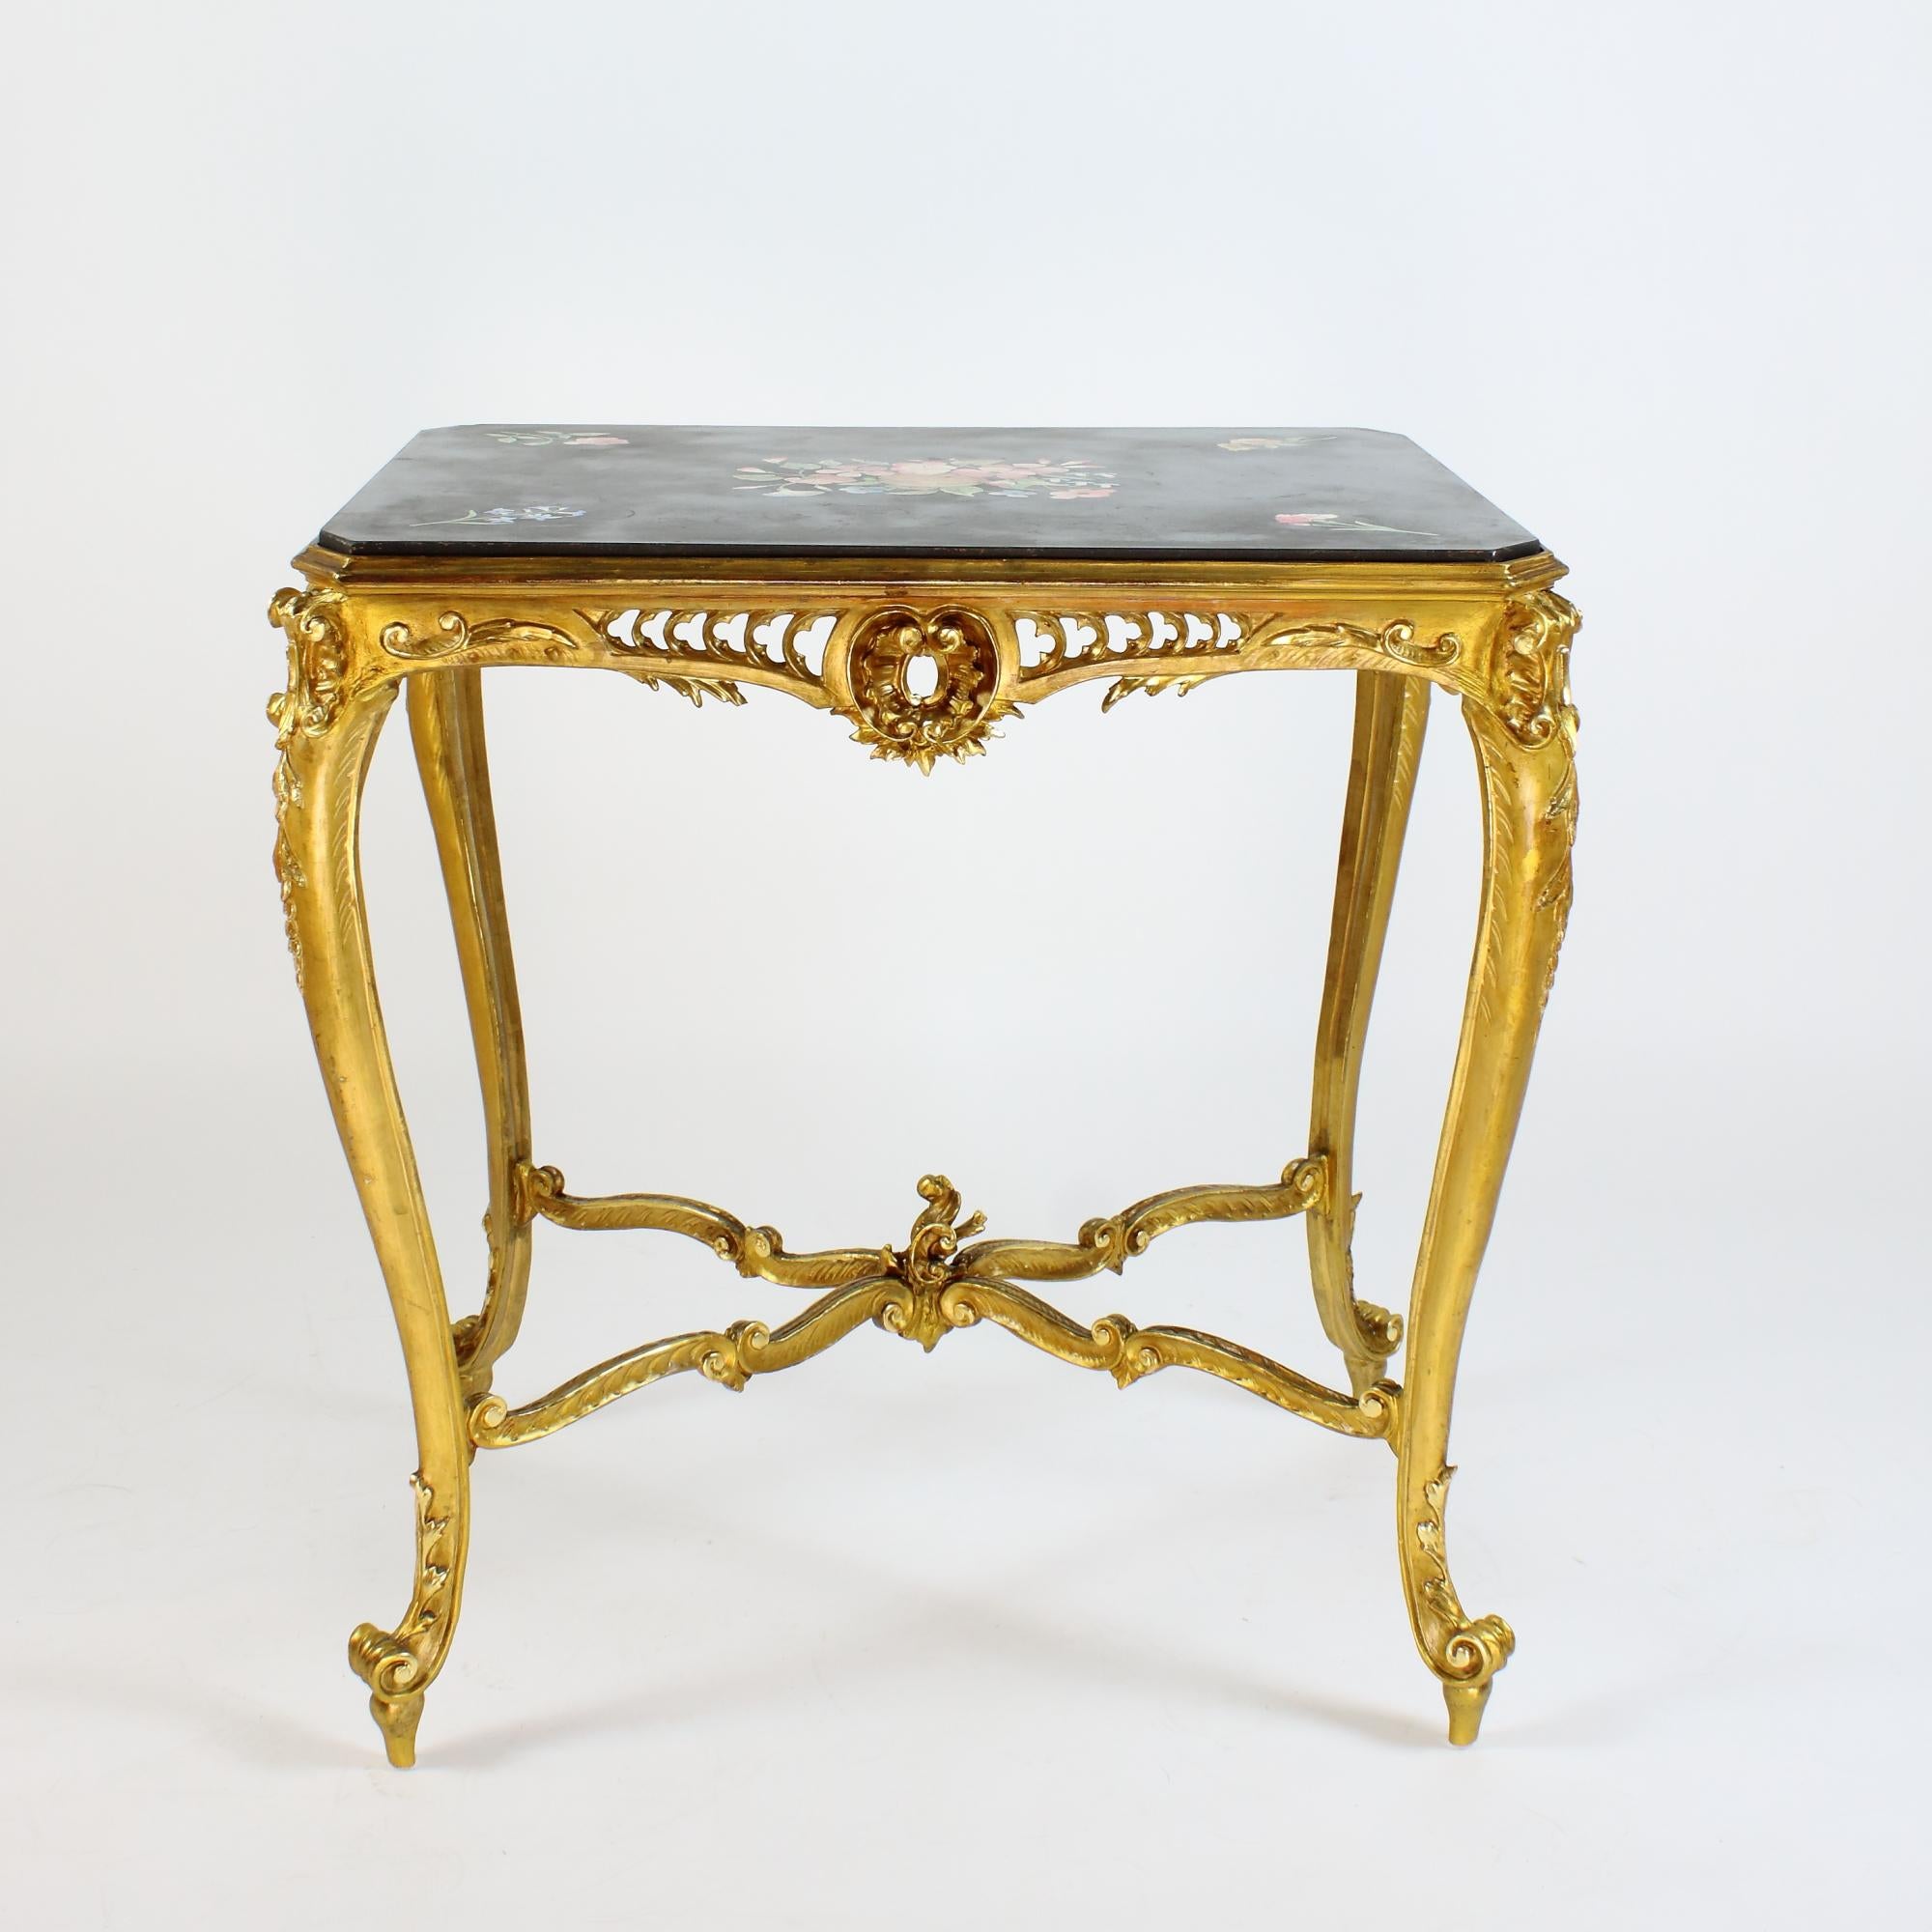 Napoleon III Louis XV style giltwood scagliola top center table dessert table

Ornamental octogonal table frame with rich, partially openwork carved Louis XV style rocaille decoration on four curved and taperring legs with scoll feet and rocaille